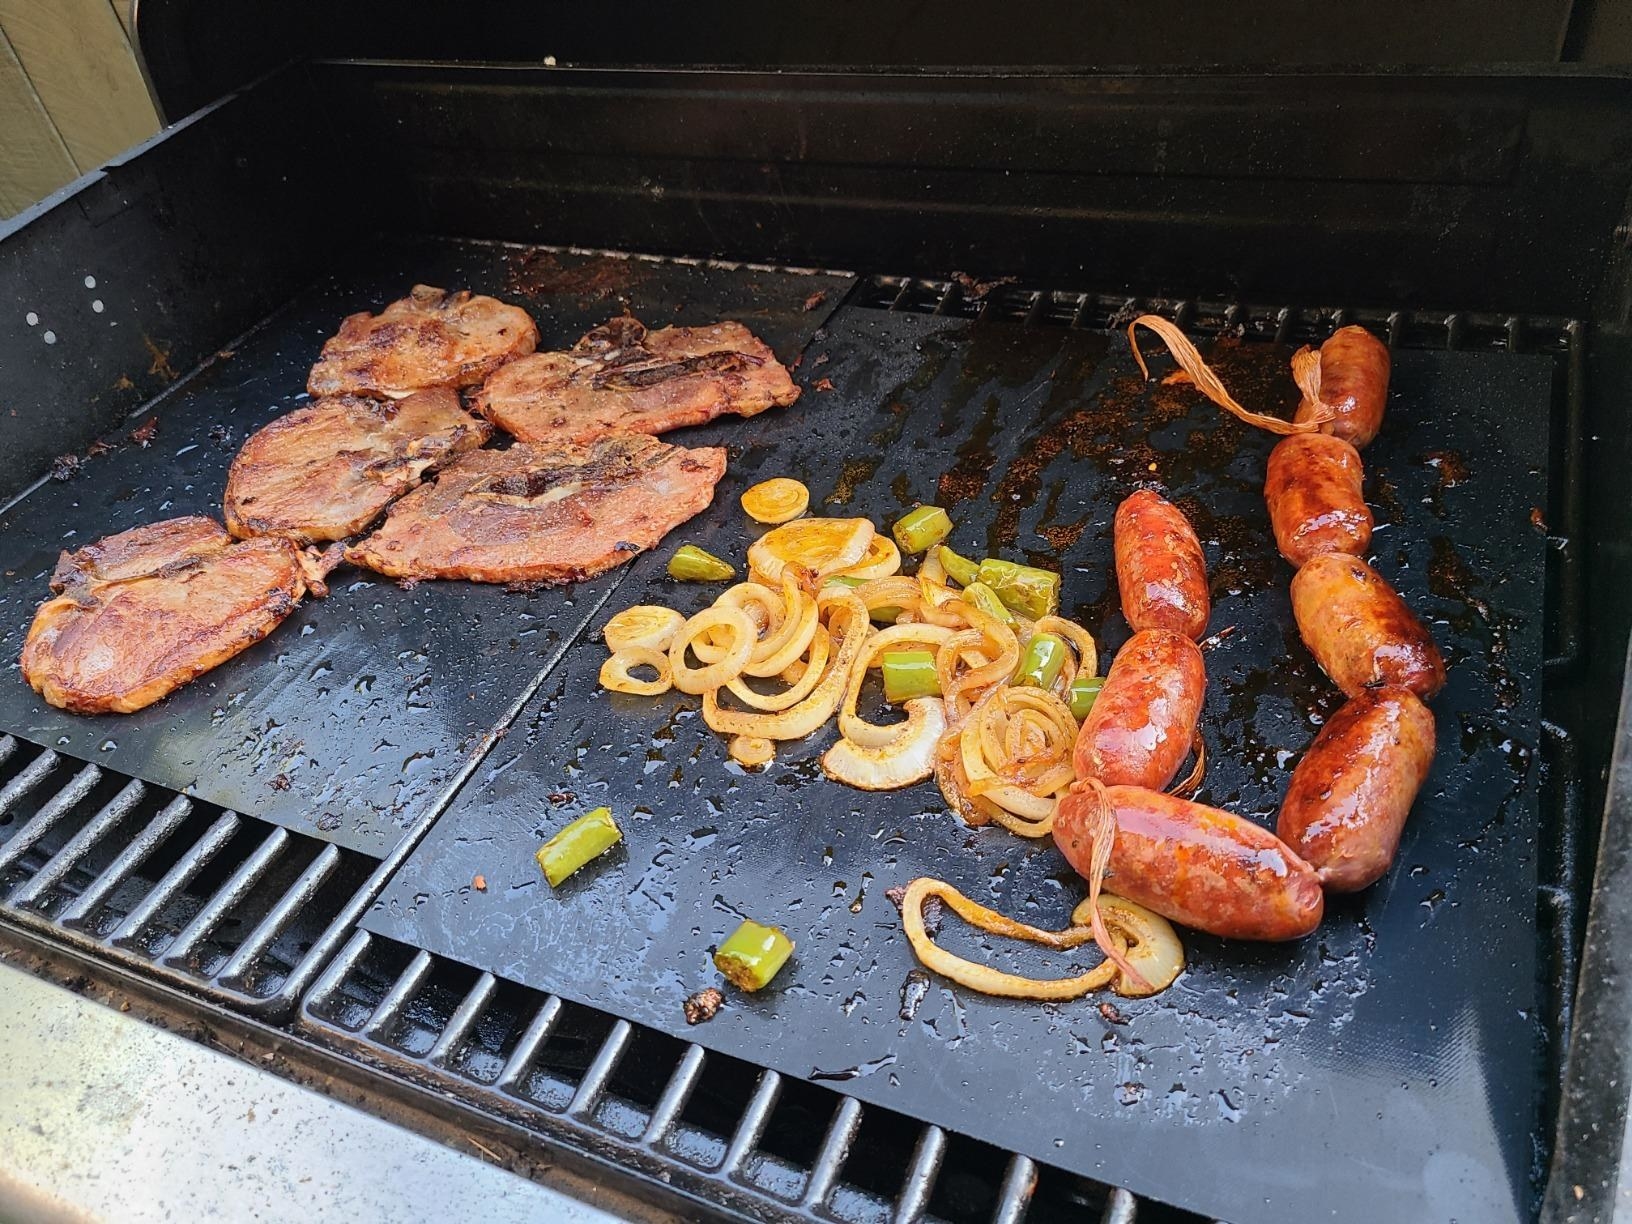 Chicken, peppers, and chorizo cooking on top of the non-stick grill mats on the grill.